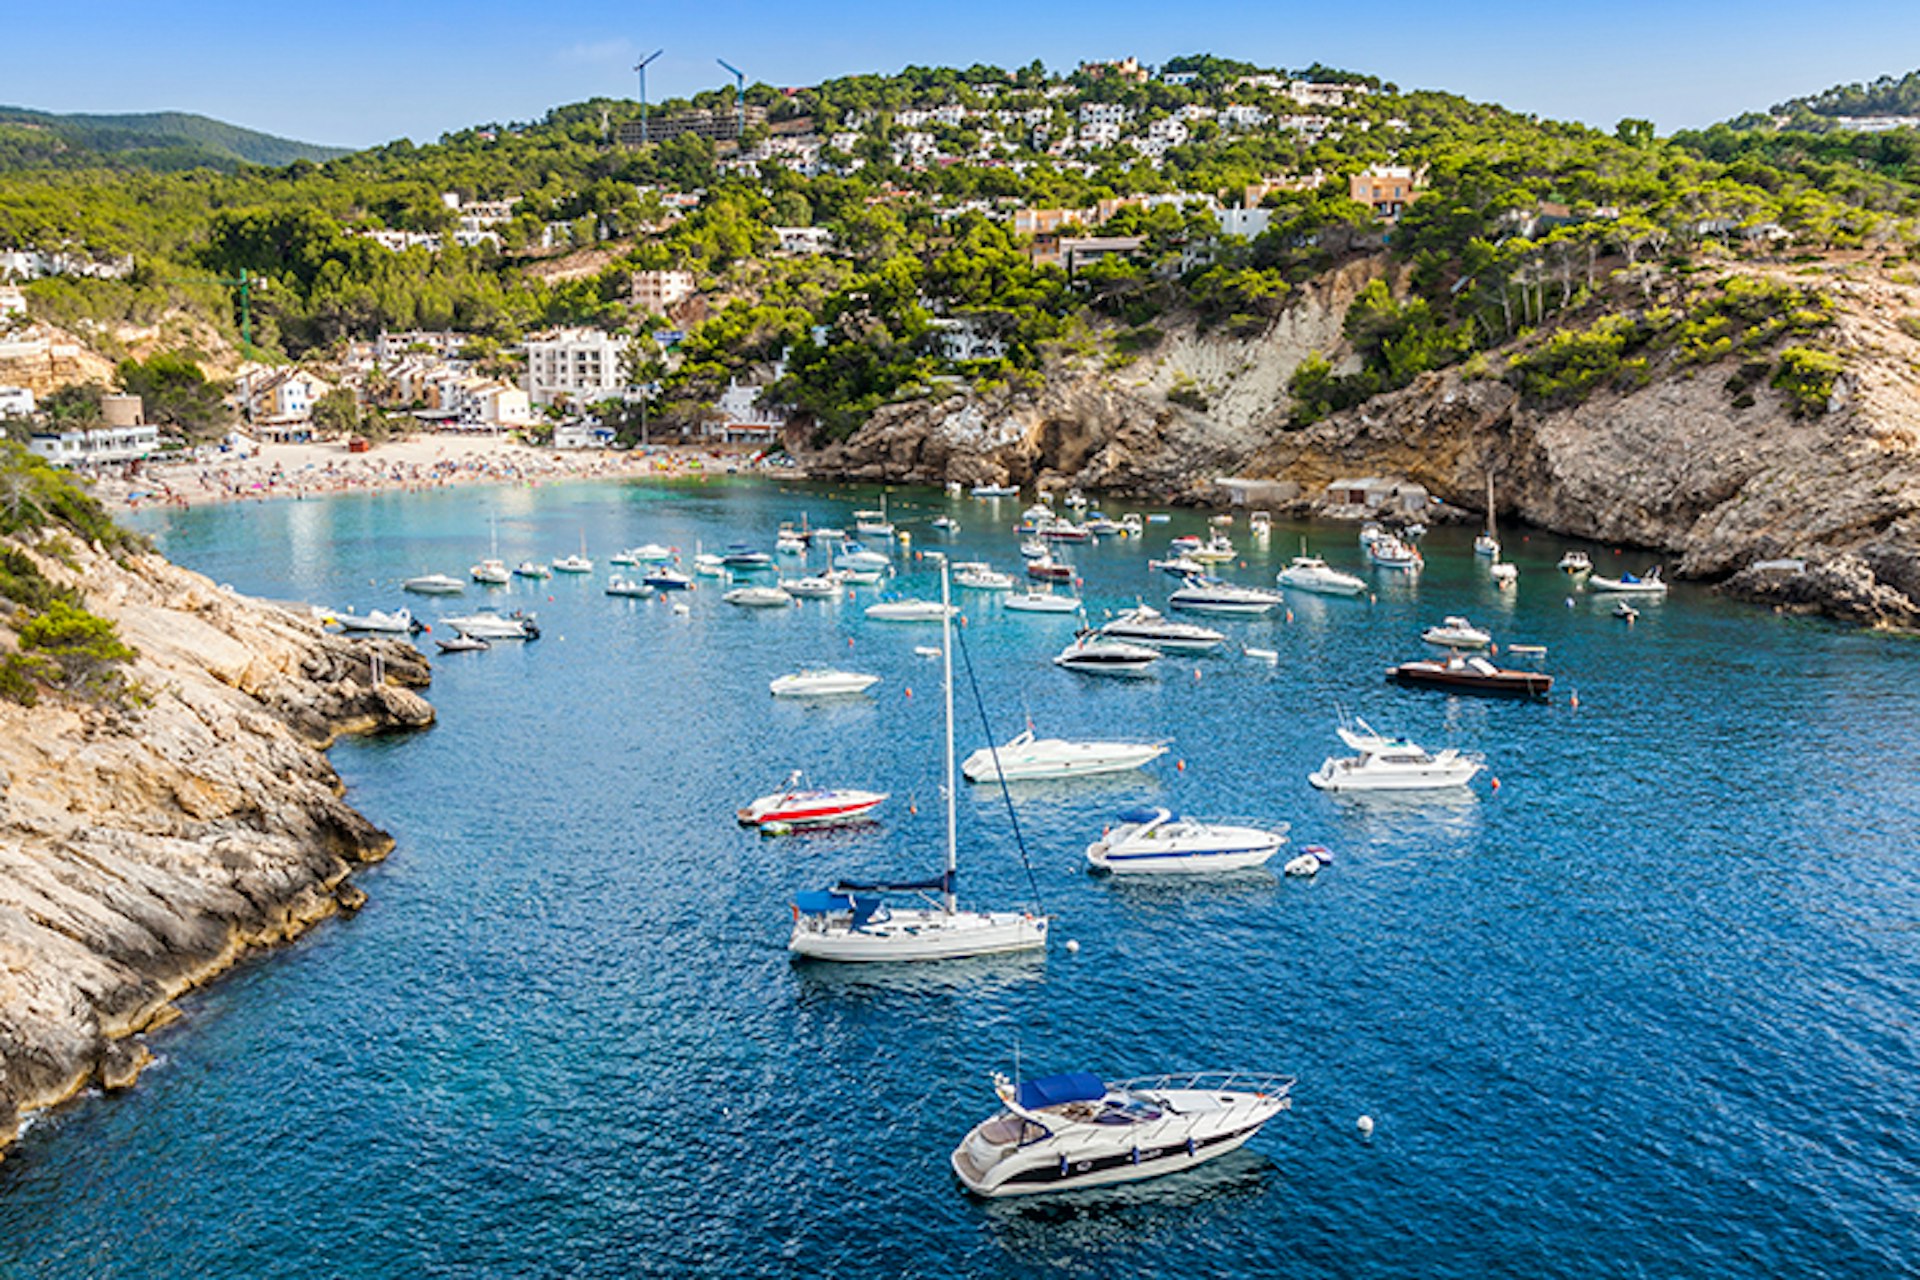 Ibiza's coastline is dotted with pretty bays for families to explore. Image by Lukasz Janyst / Shutterstock